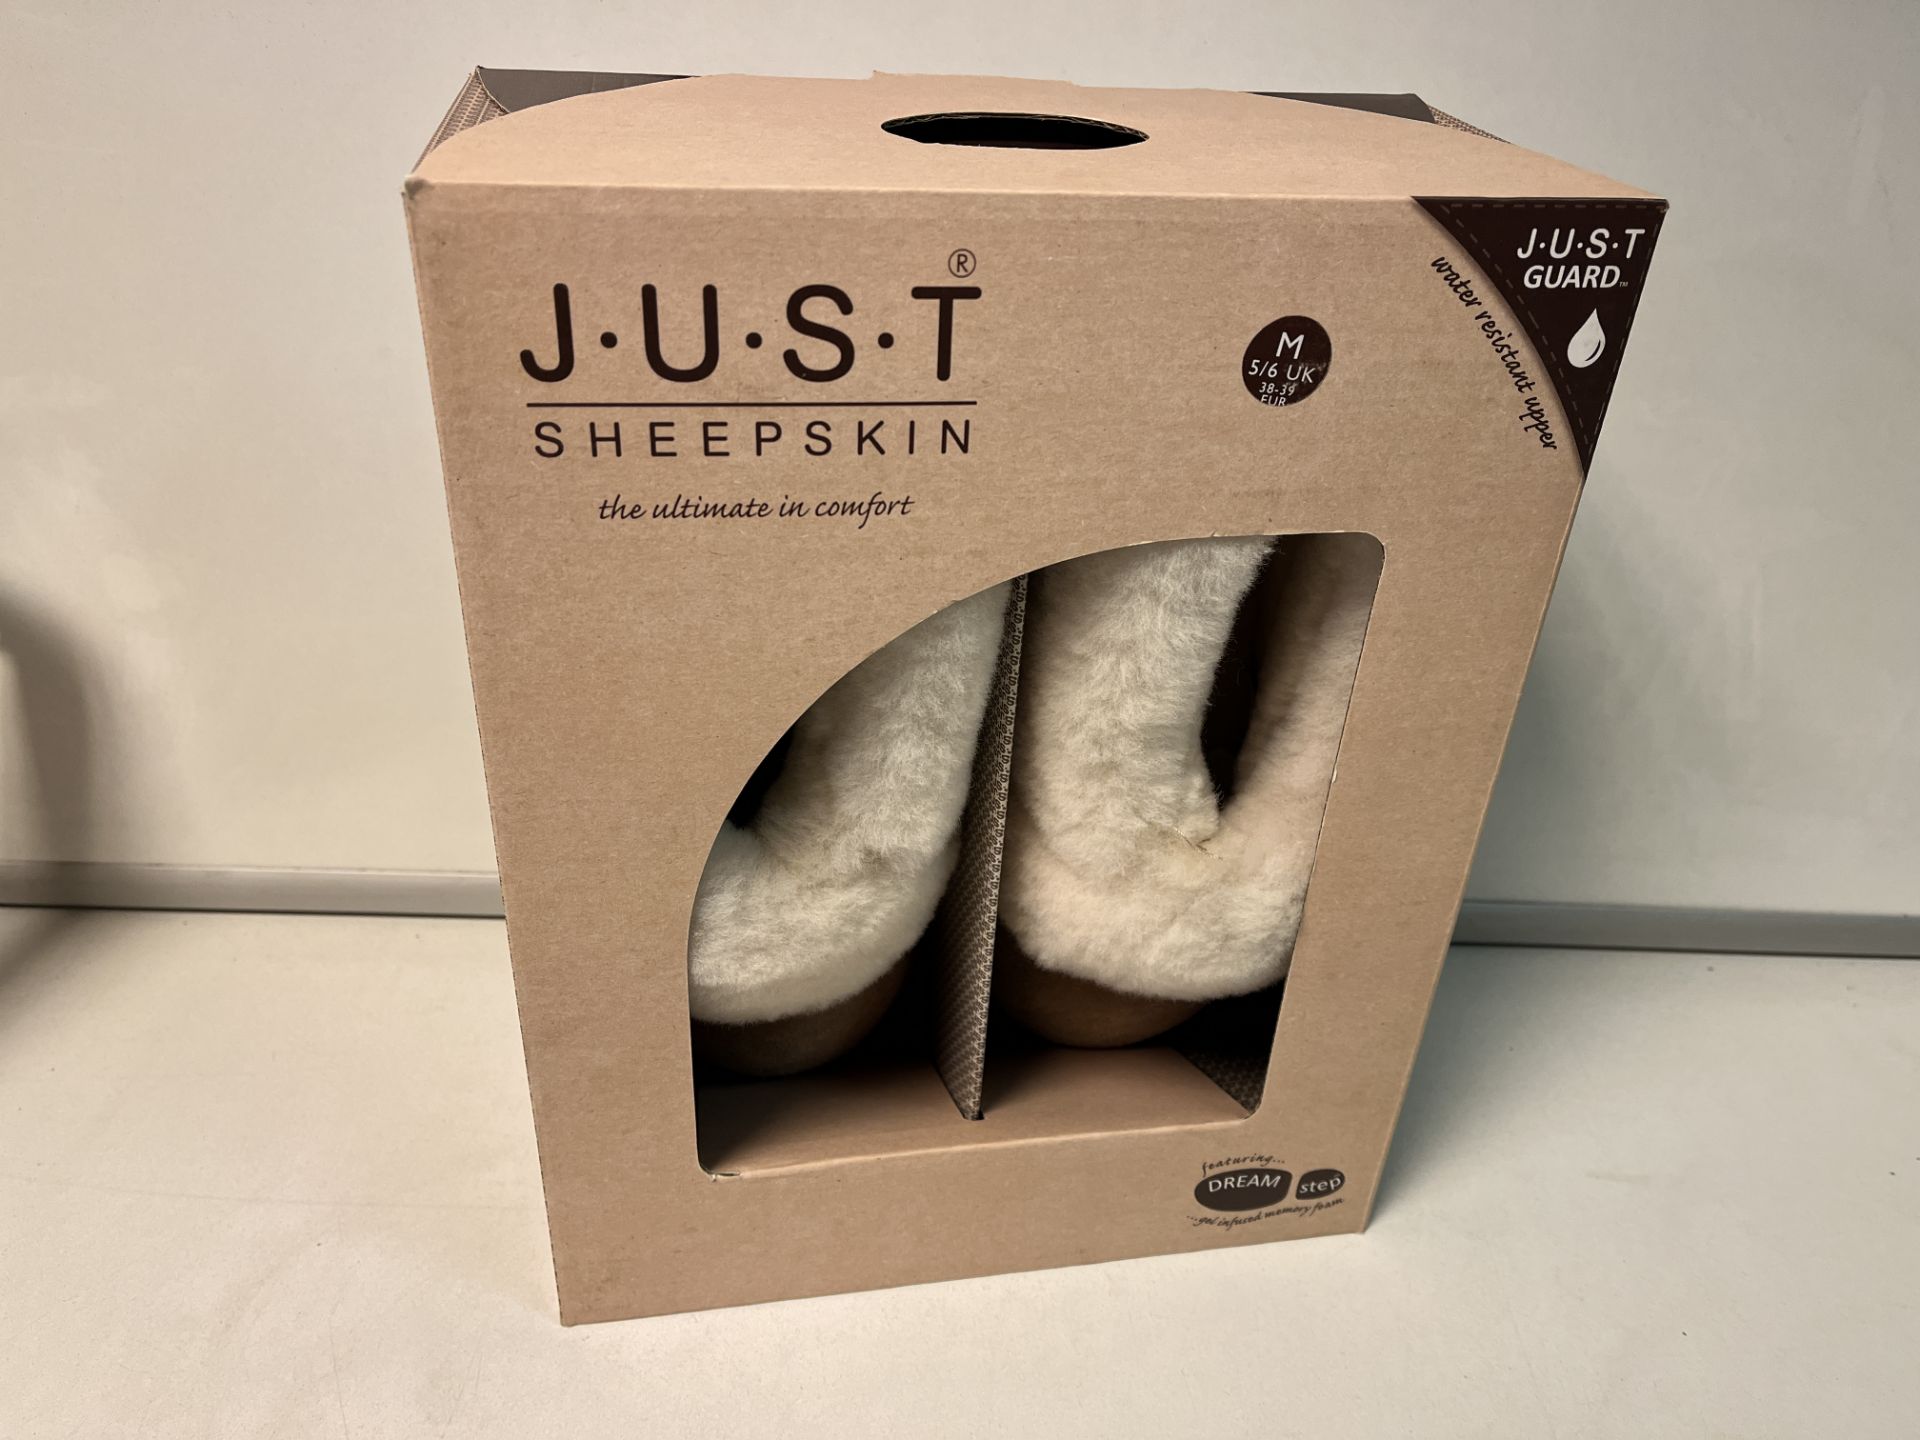 5 X BRAND NEW TOTES JUST SHEEPSKIN LADIES CLASSIC SLIPPERS SIZE MEDIUM RRP £65 EACH R6